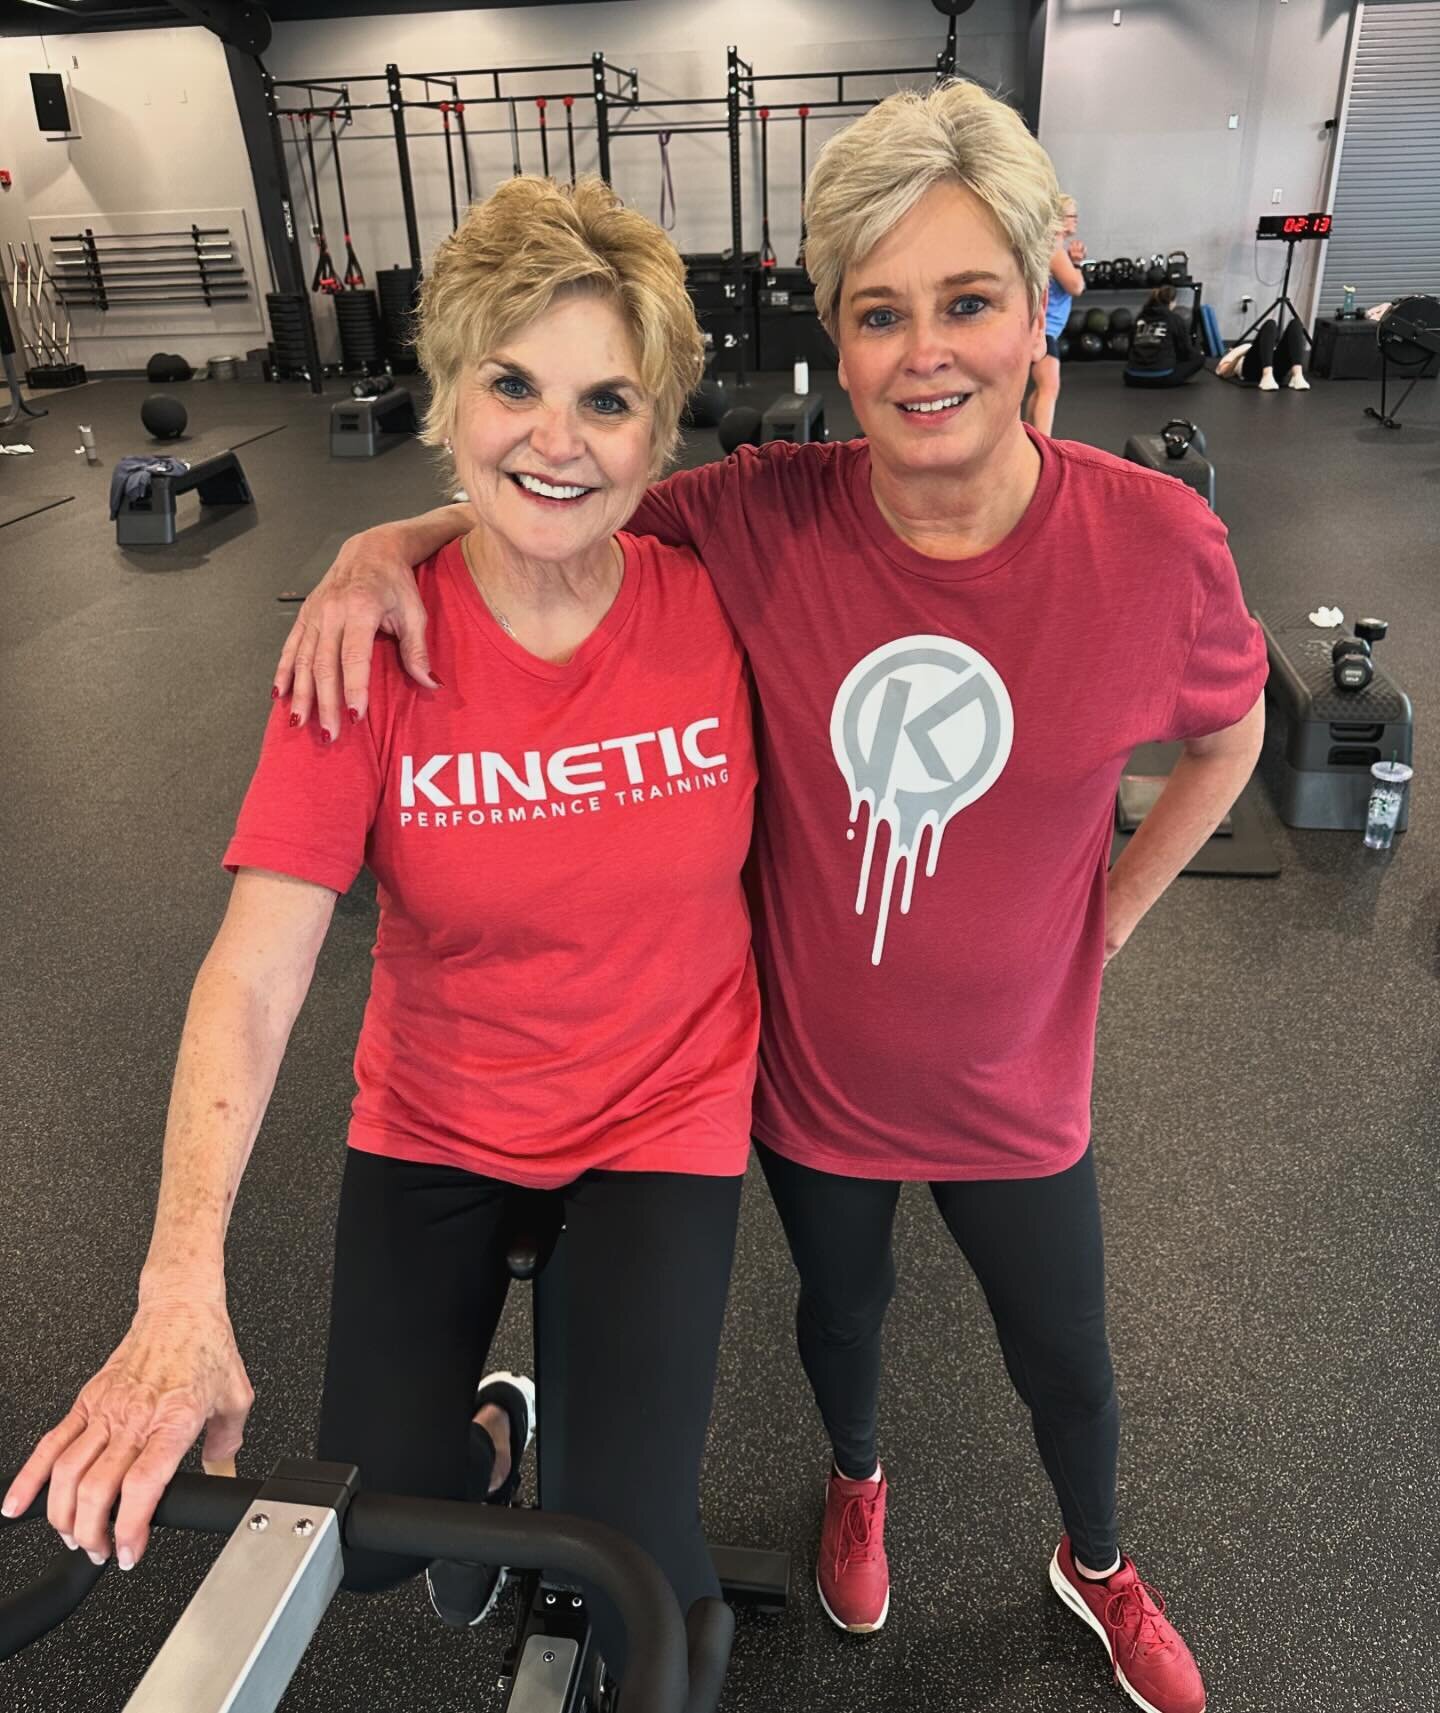 Grab your bestie and get to the gym!

Workouts are better with friends &hearts;️💪🏽

#runlifttrain #kpt #fitfriends